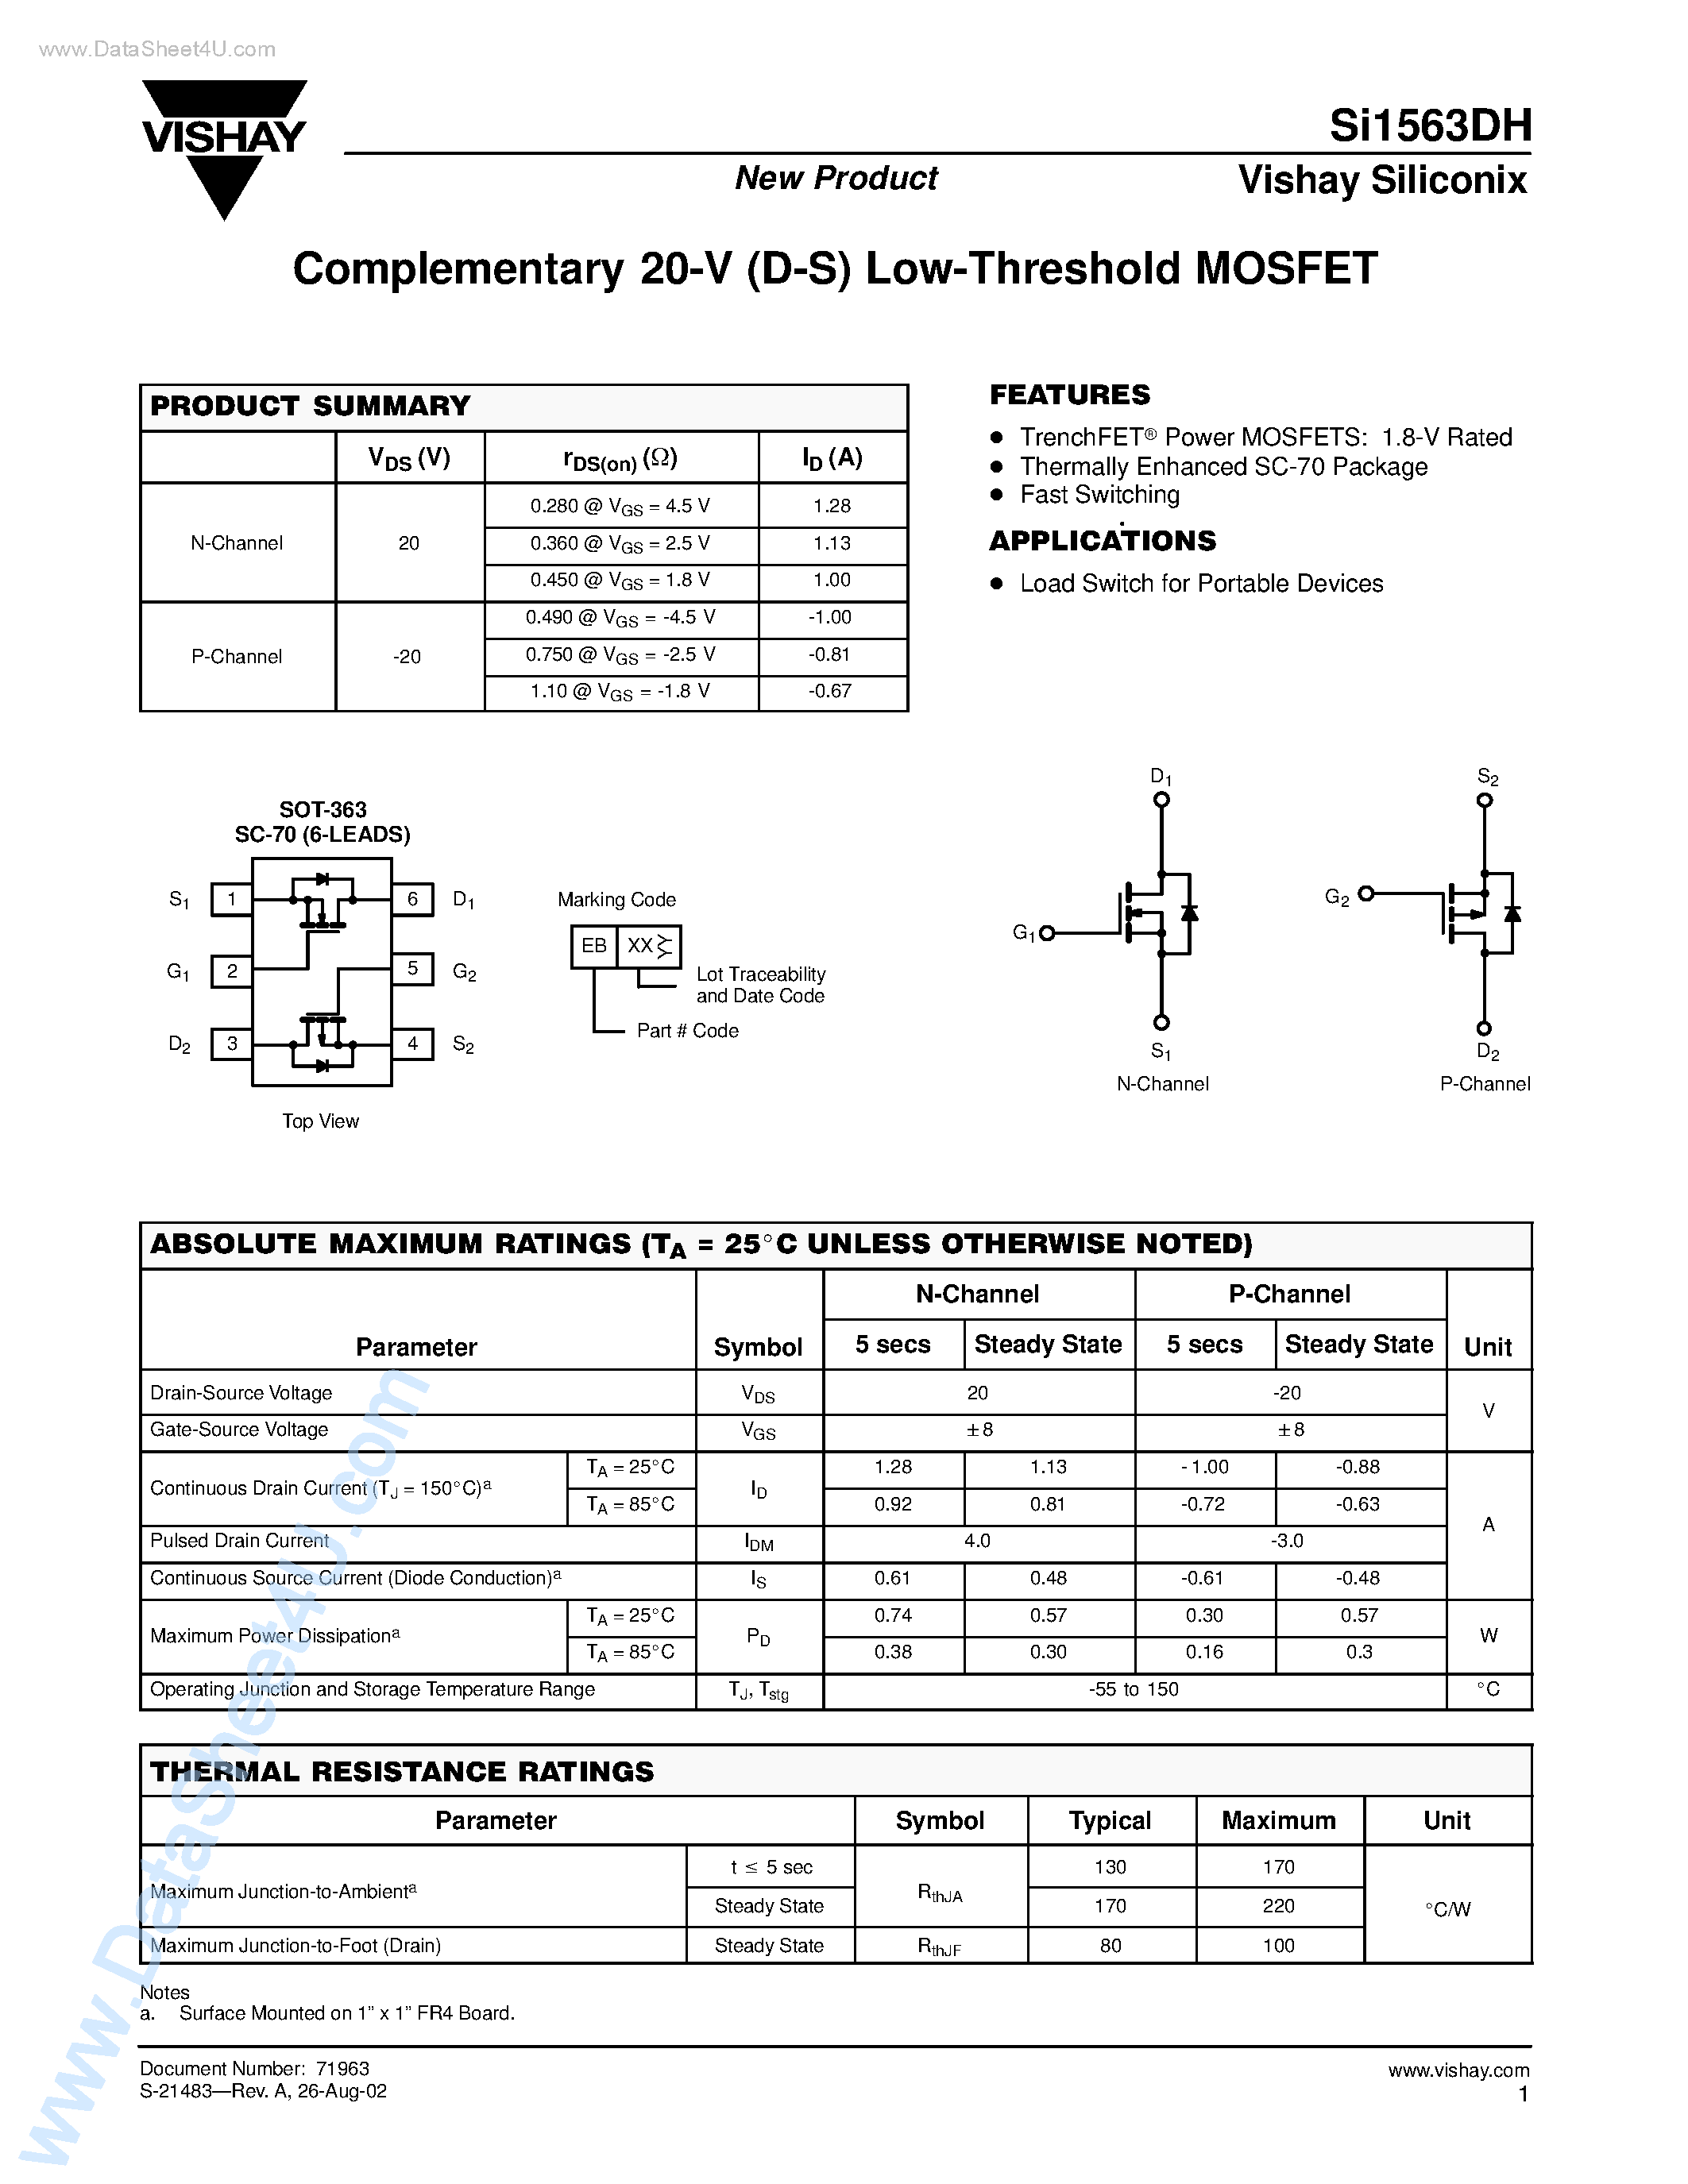 Datasheet SI1563DH - Complementary 20-V (D-S) Low-Threshold MOSFET page 1